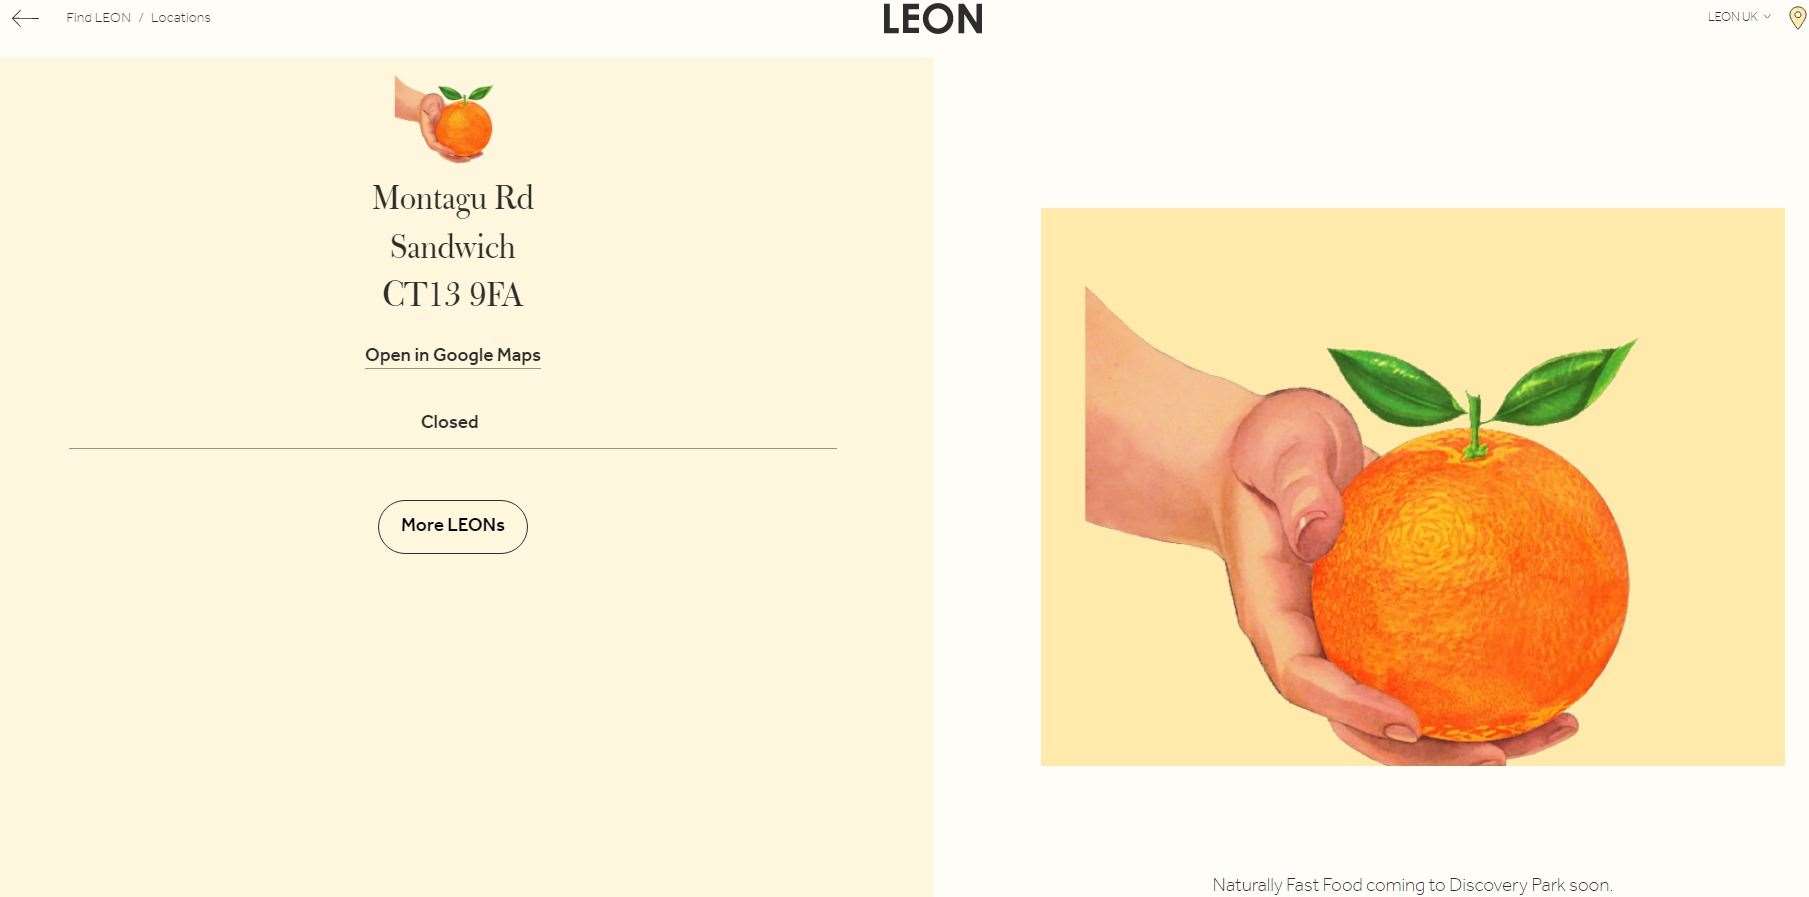 Leon's website says the Sandwich location is coming soon. Picture: Screengrab from Leon